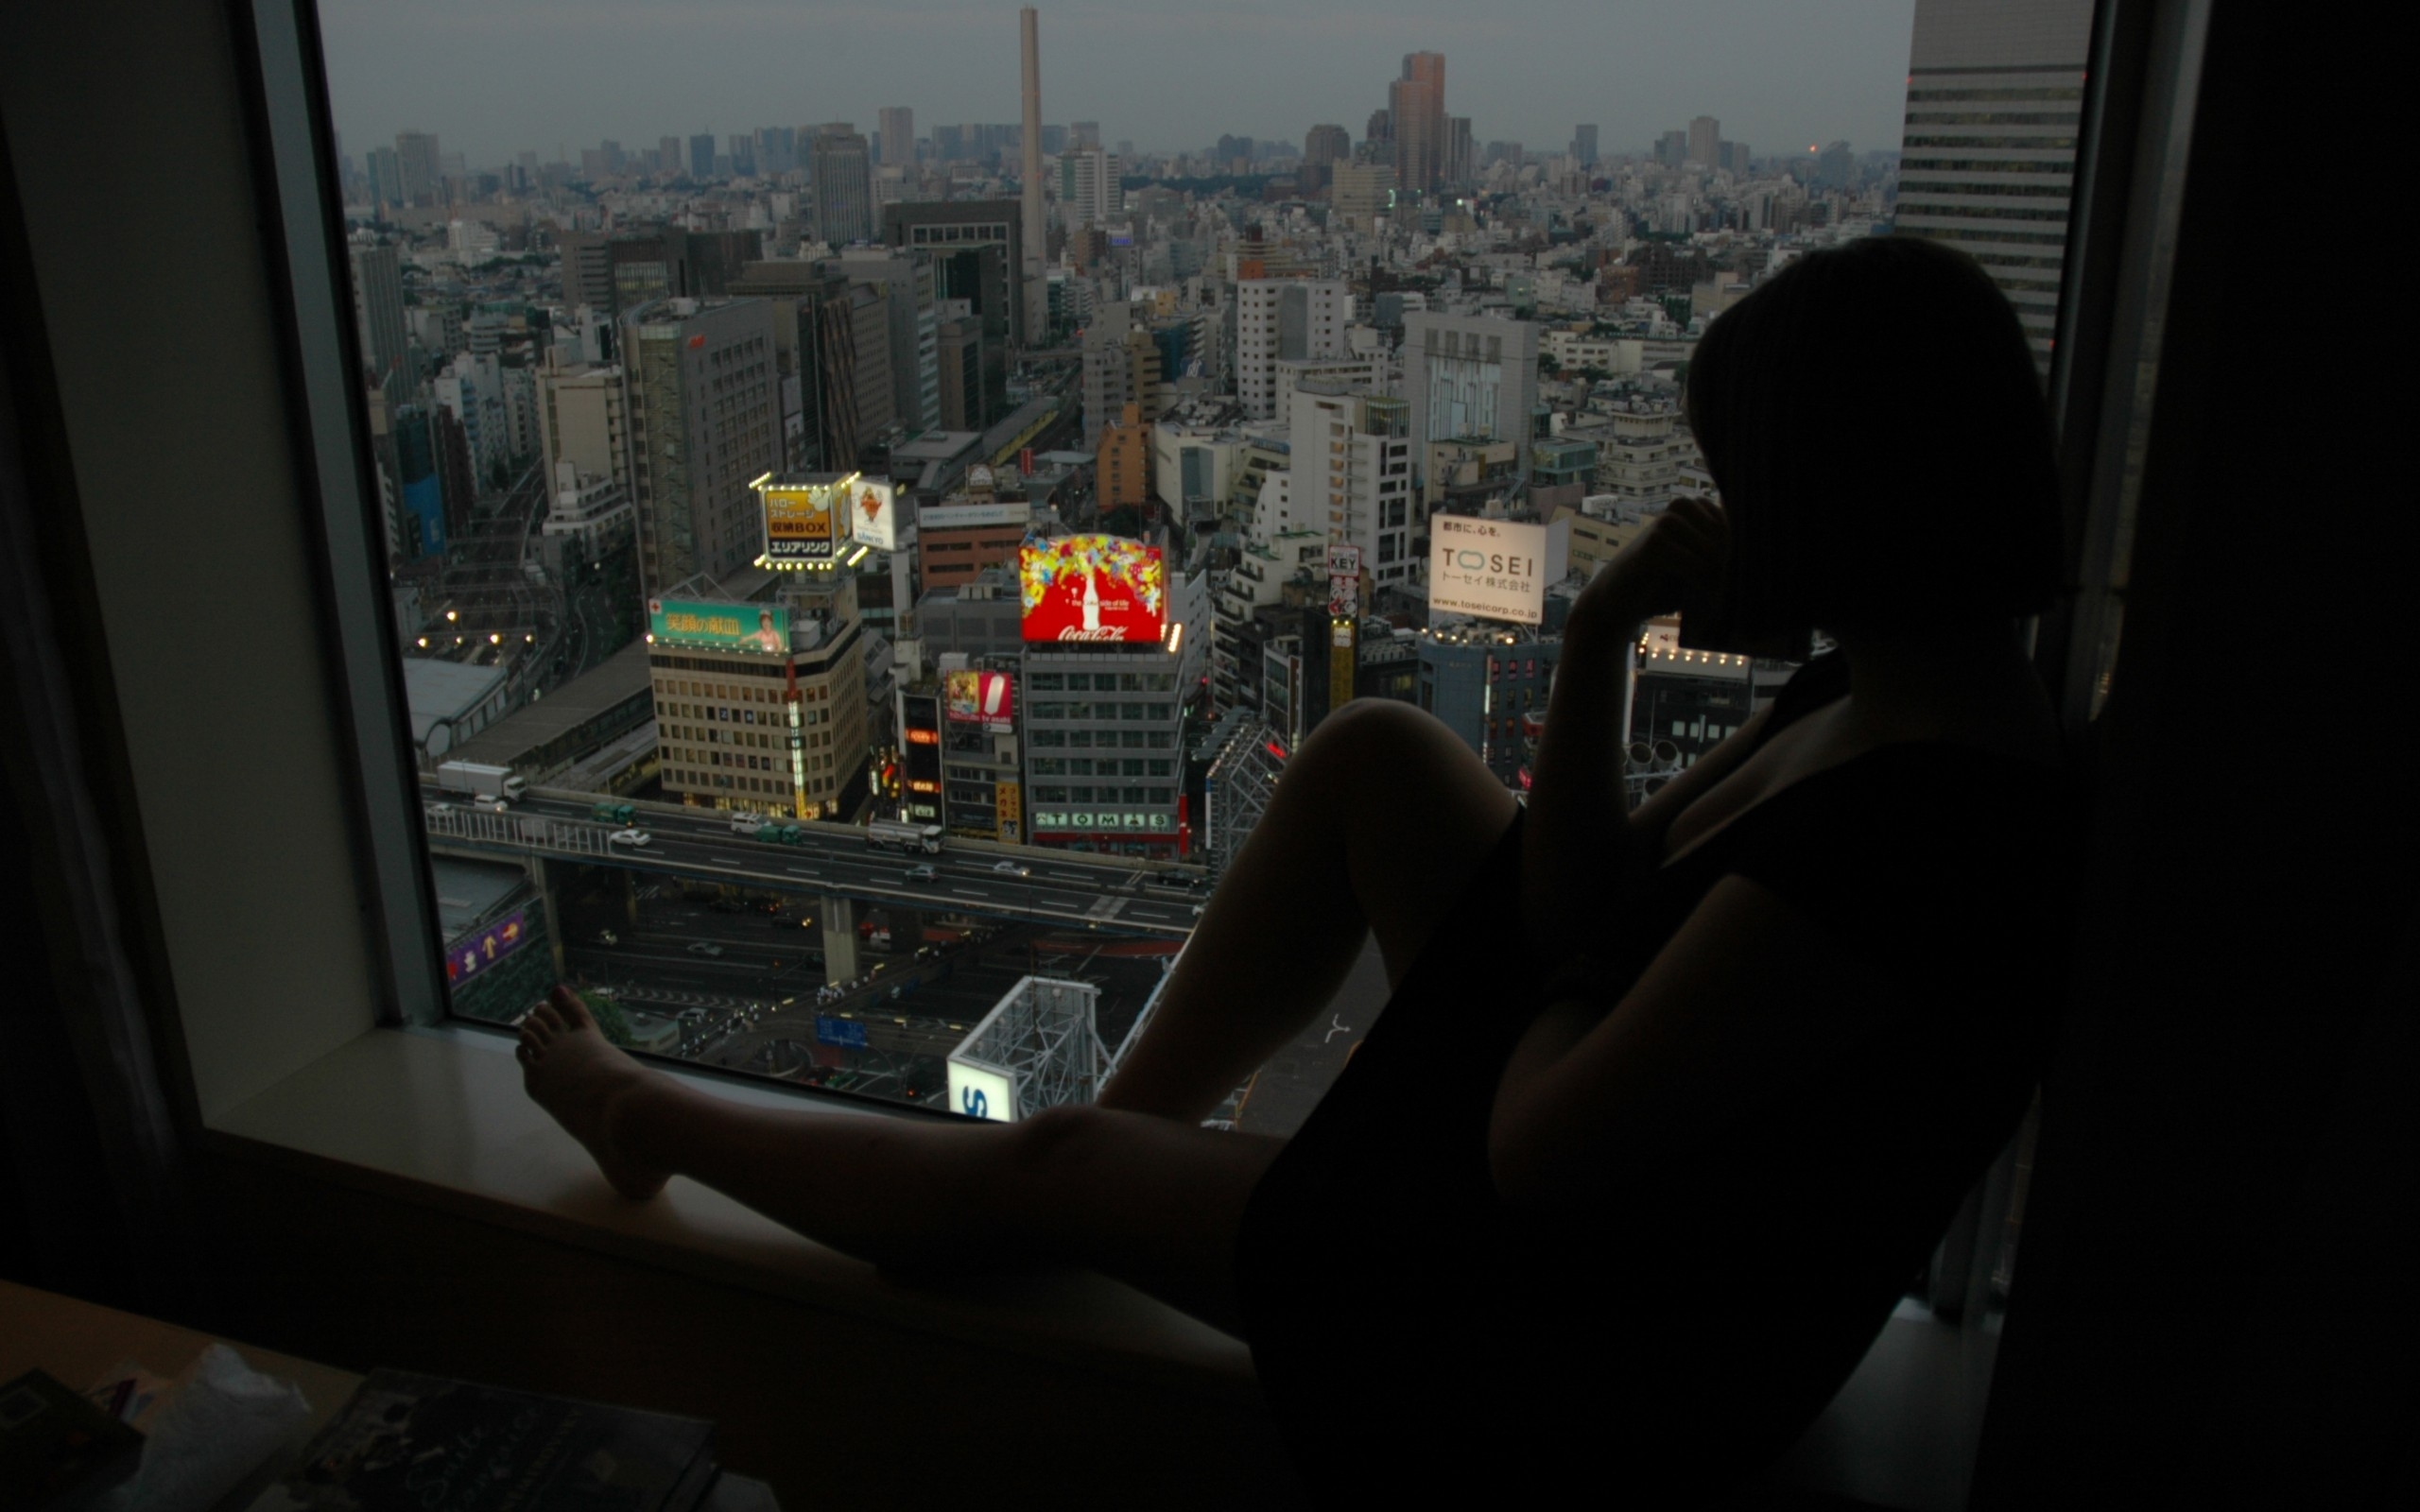 movie, lost in translation